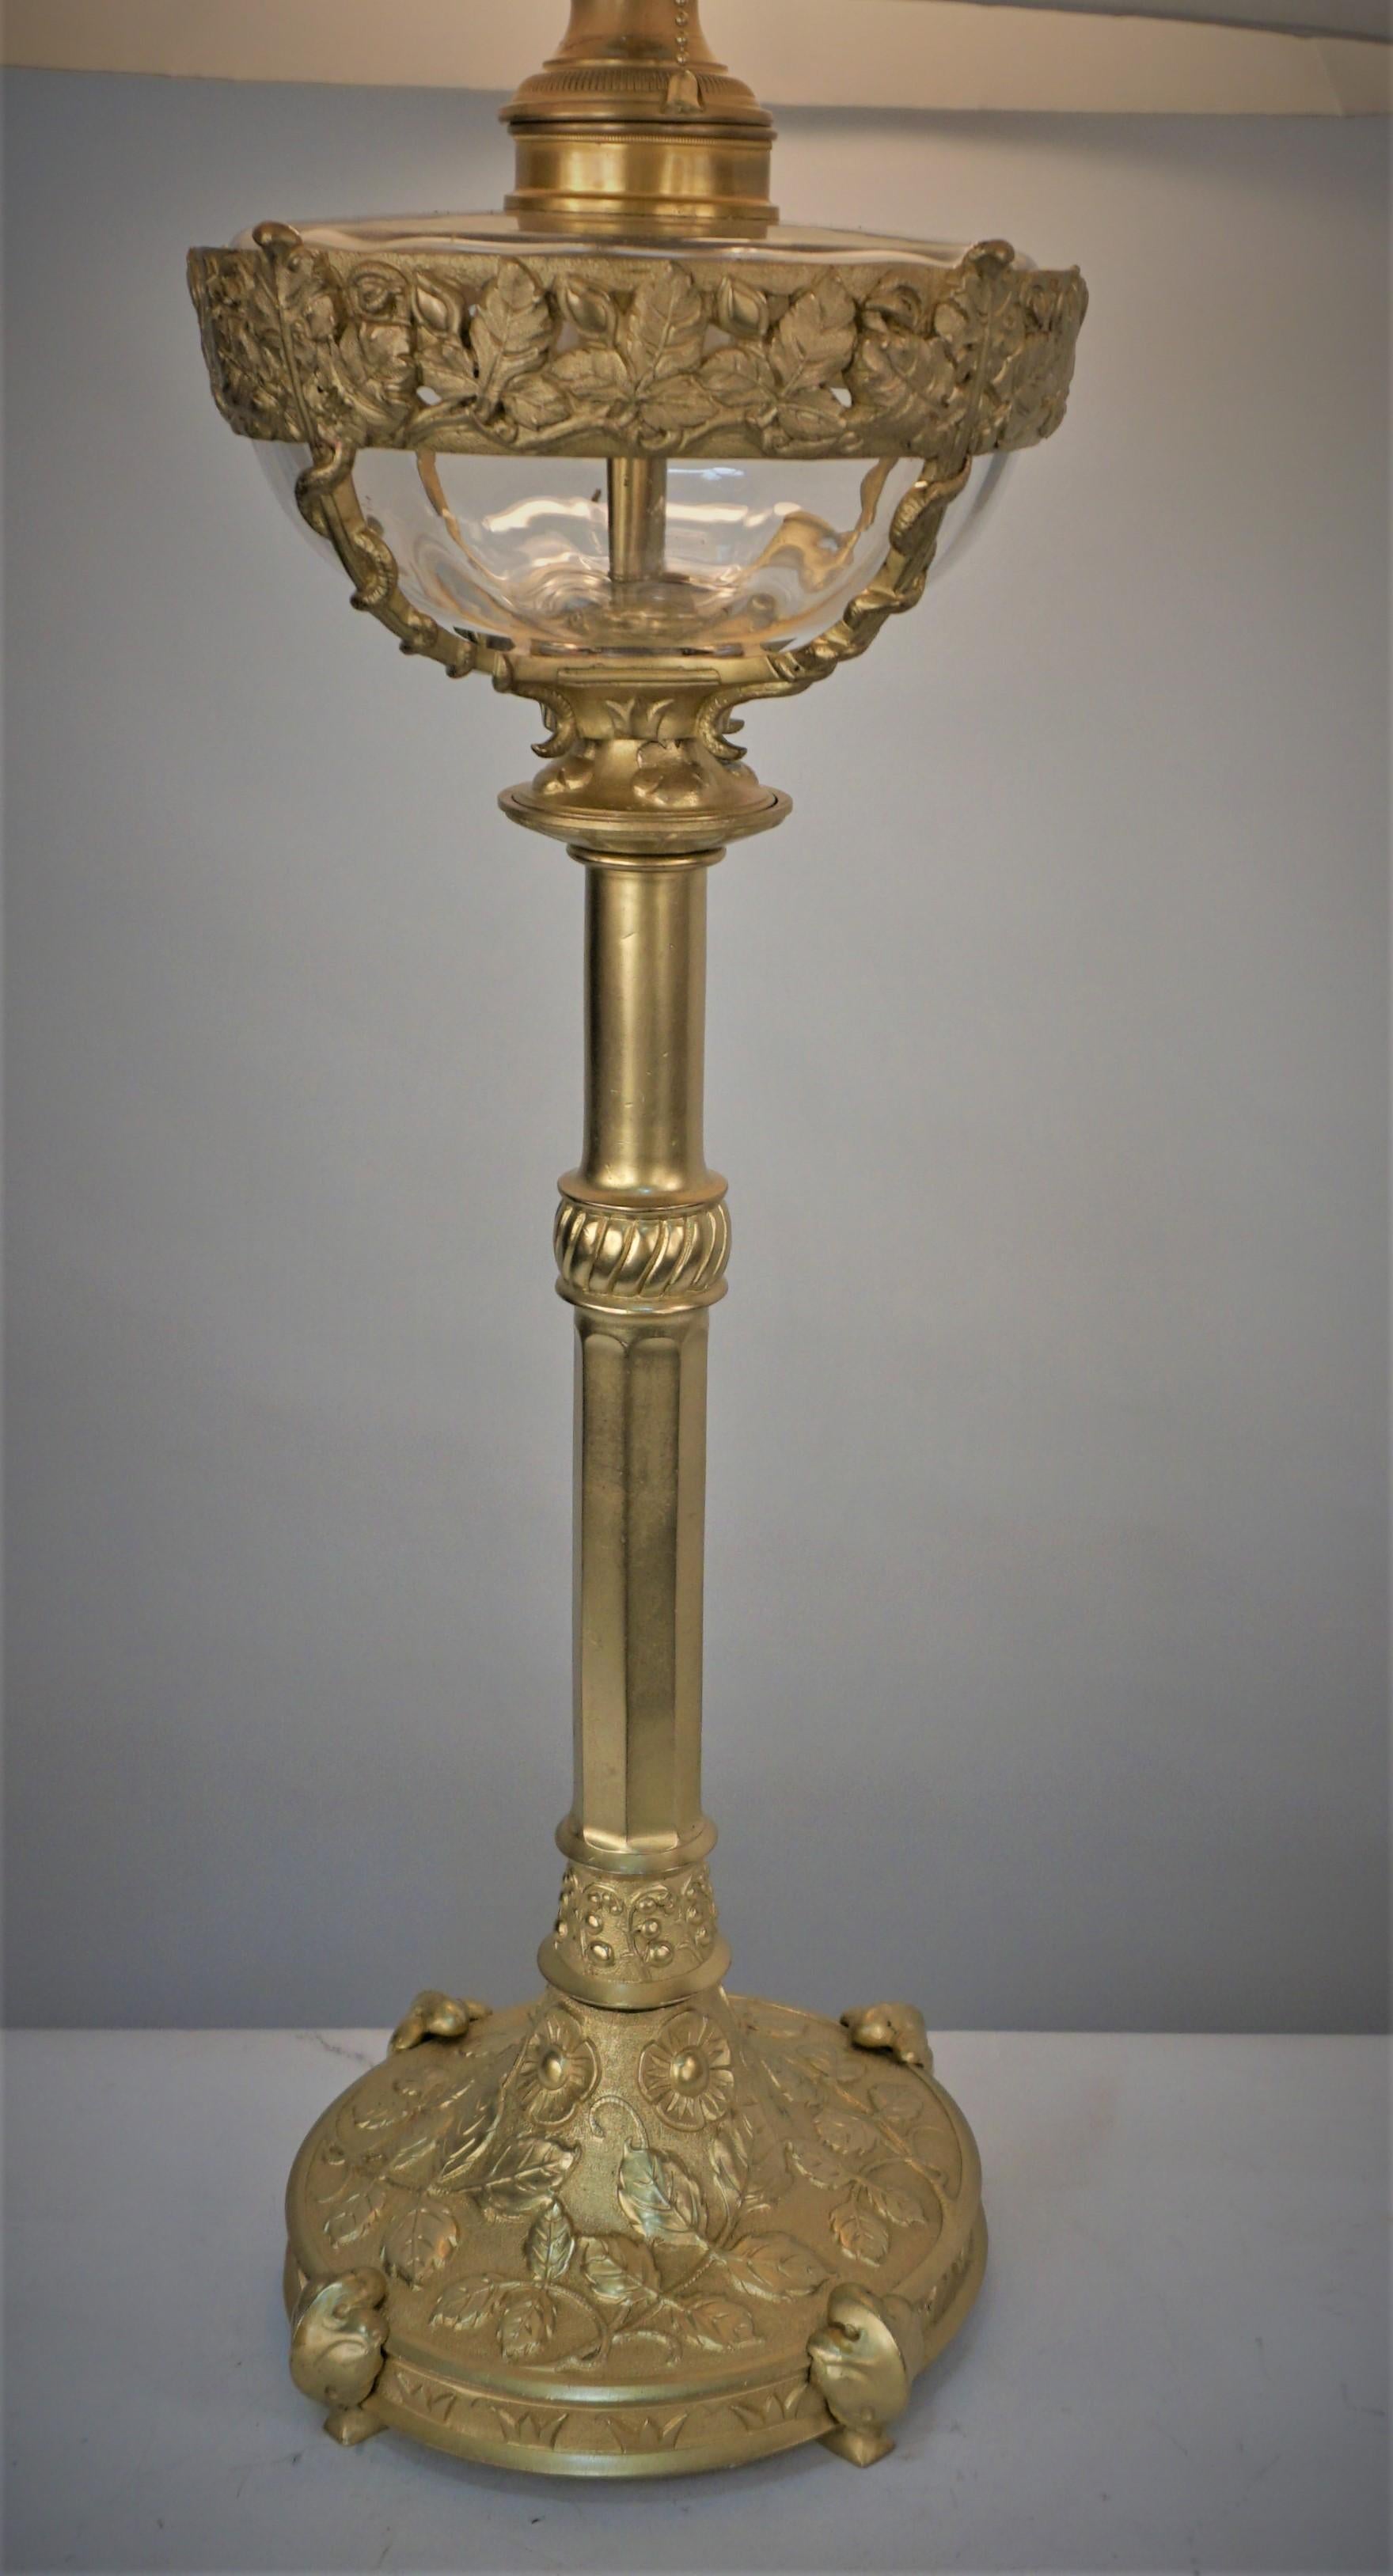 Beautiful 19th century bronze and crystal oil lamp has been professionally electrified with double pull chain socket and fitted with hand box pleated silk lampshade.
Measurment include the lampshade.